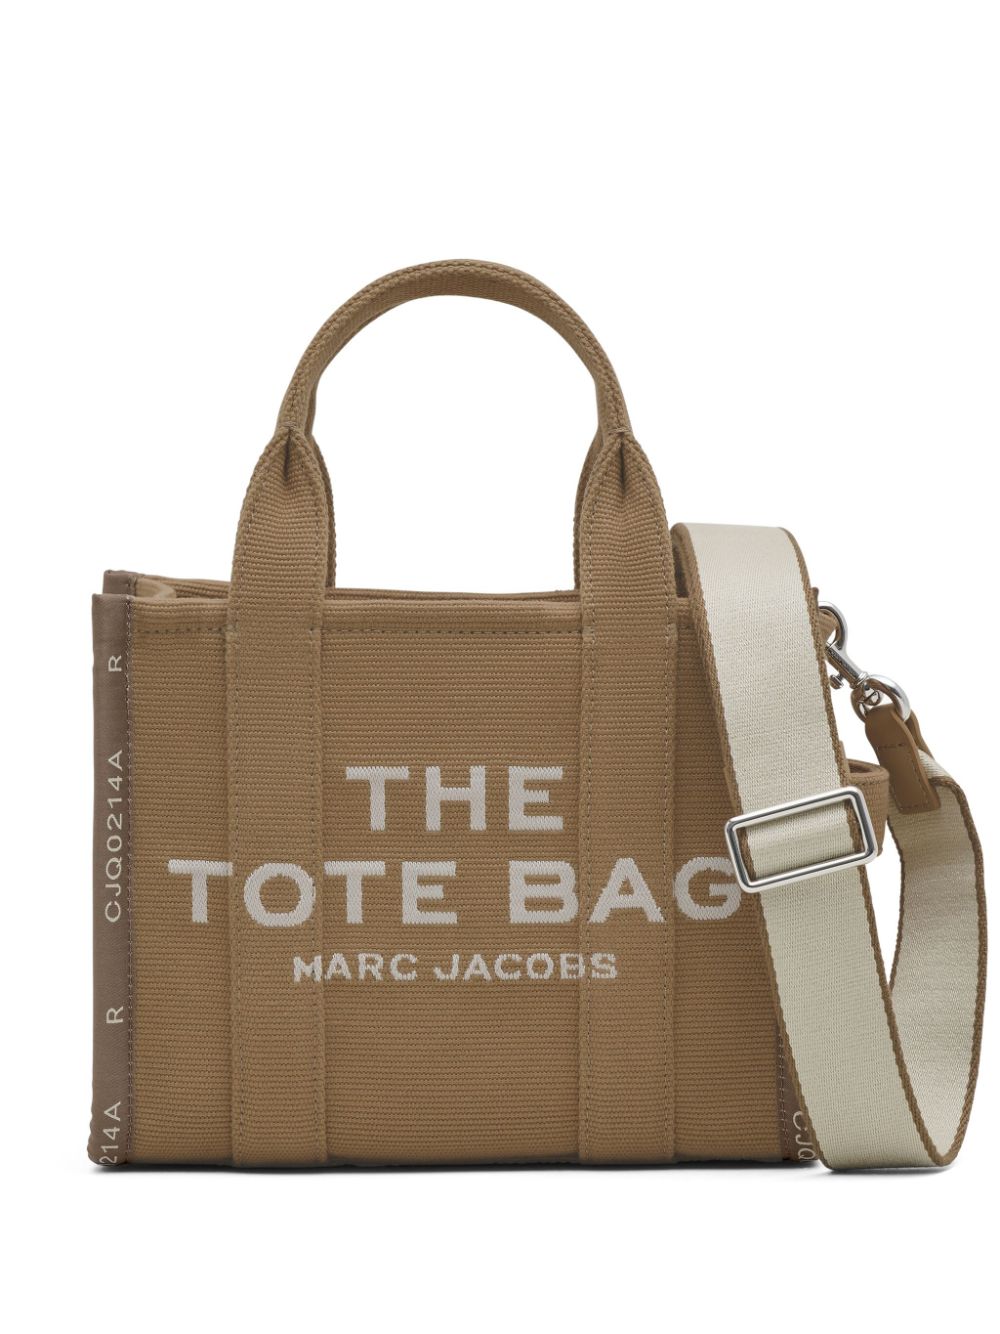 Buy MARC JACOBS The Small Tote Bag, Brown Color Women